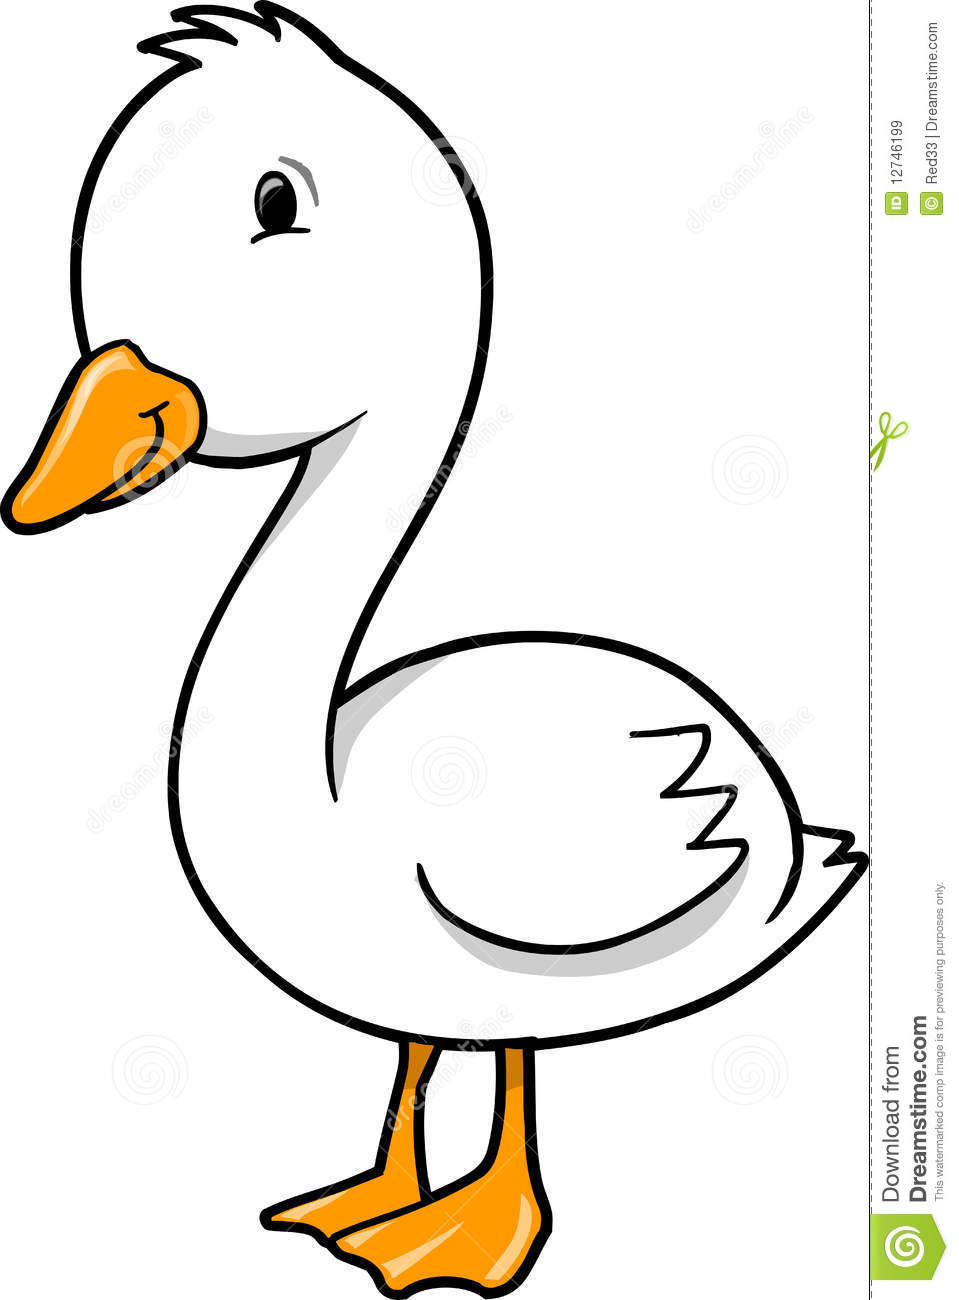 Duck Goose Royalty Free Stock Images   Image  12746199